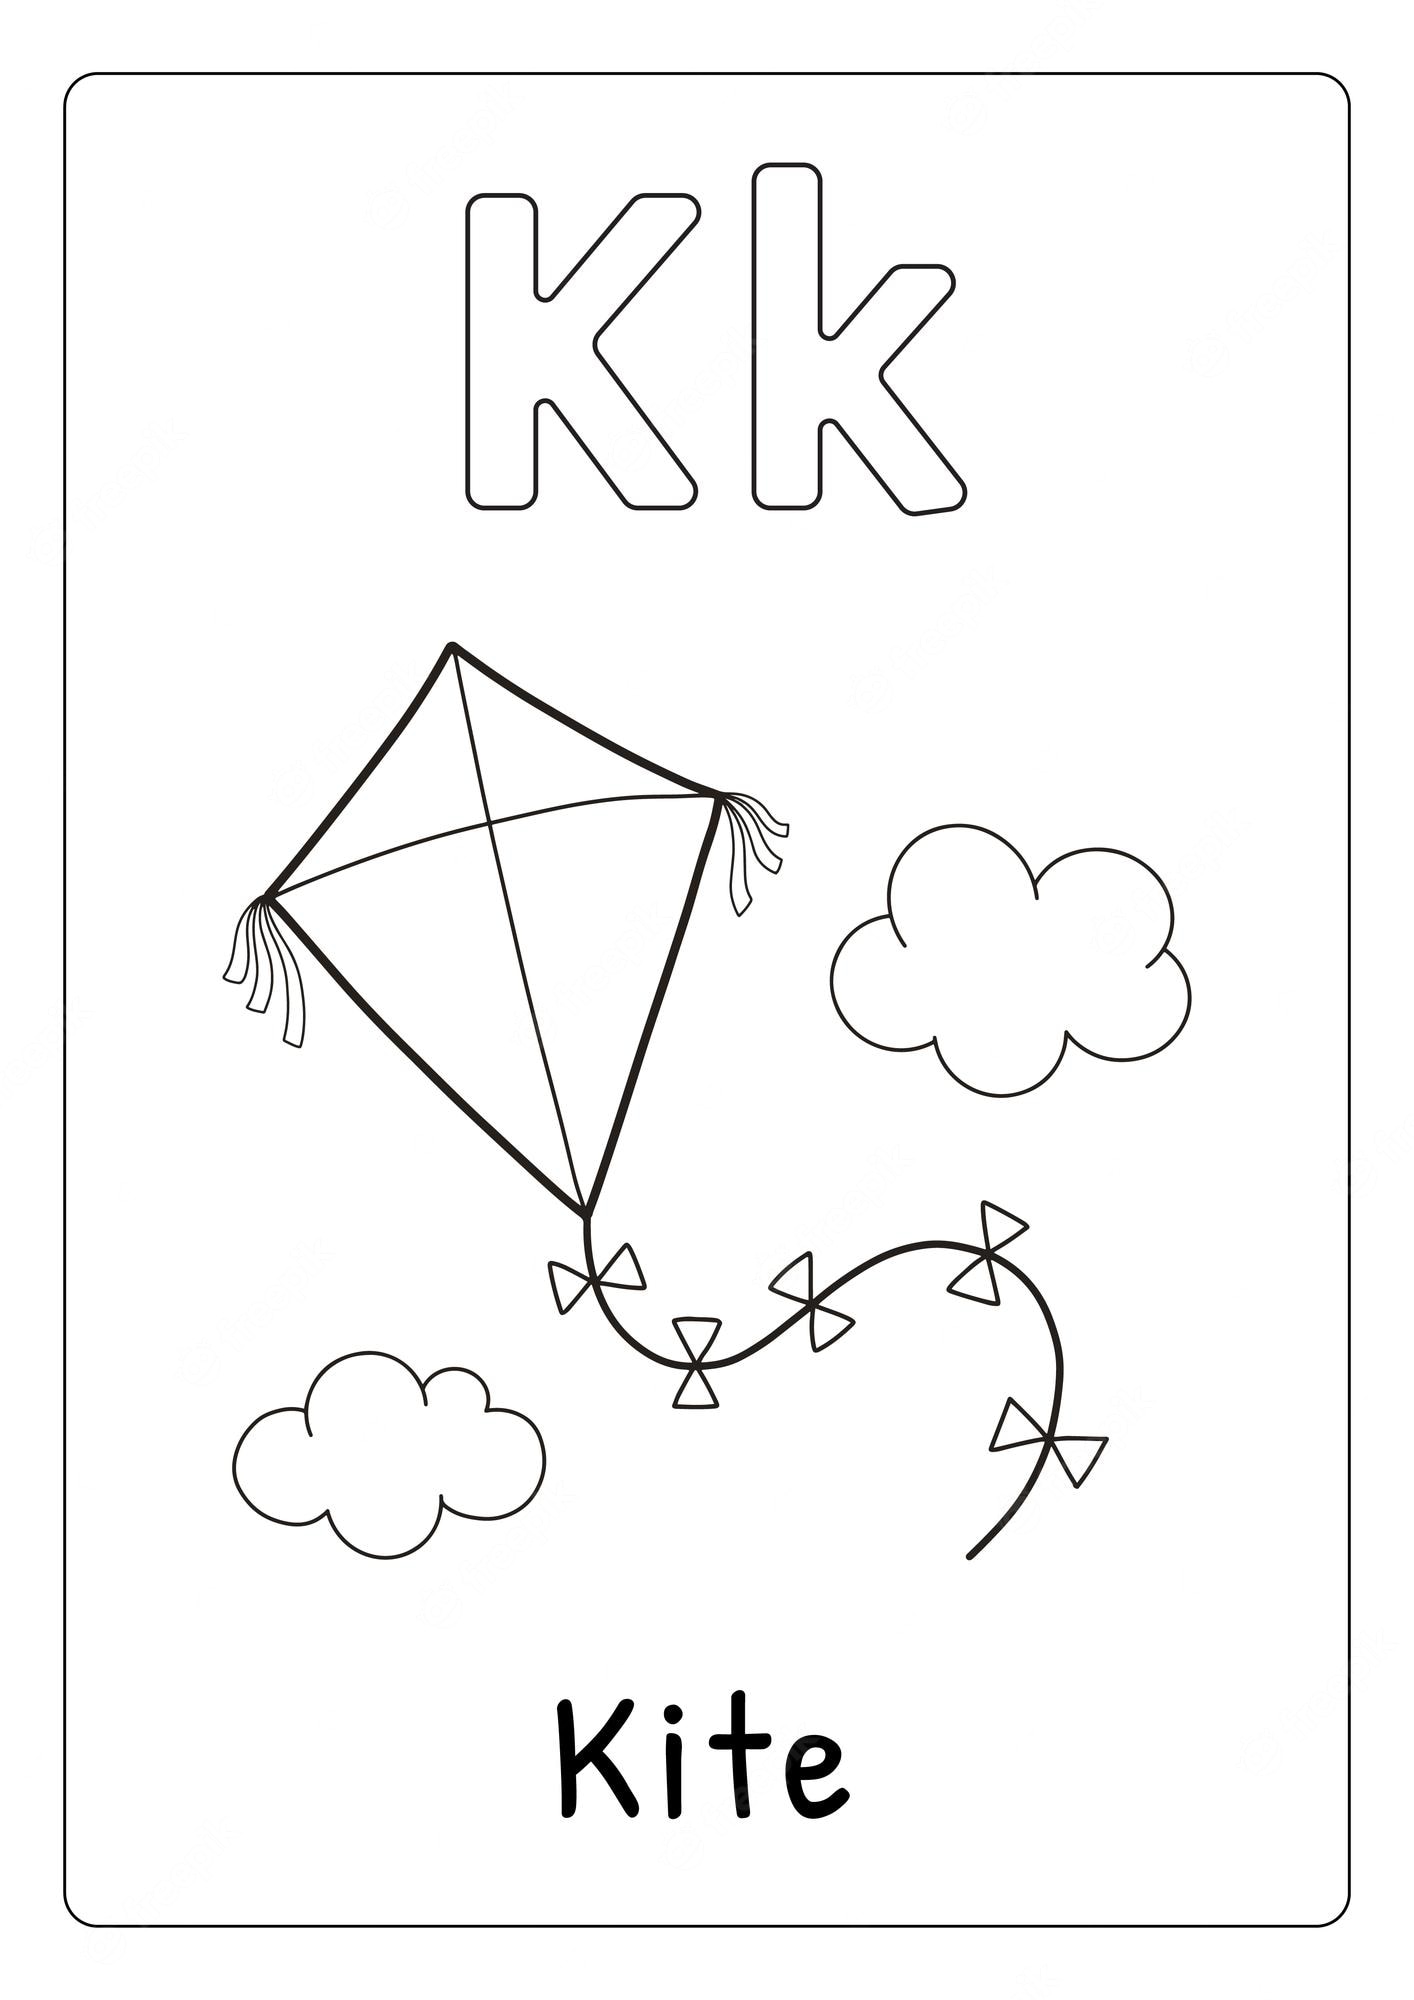 Premium Vector | Alphabet letter k for kite coloring page for kids